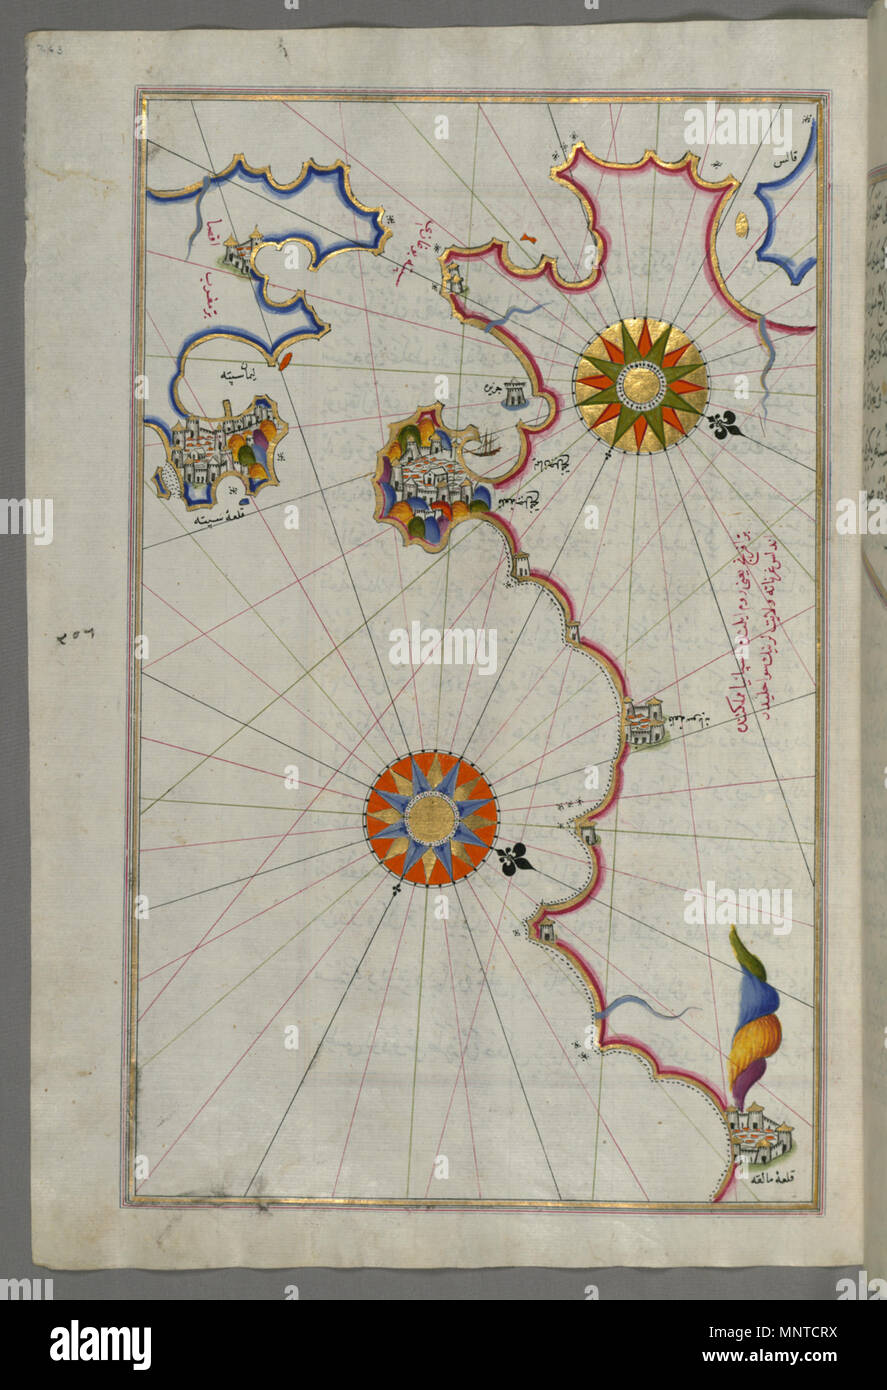 Piri Reis (Turkish, 1465-1555). 'Leaf from Book on Navigation,' 17th-18th century. ink, paint, and gold on paper. Walters Art Museum (W.658.263A): Acquired by Henry Walters. W.658.263a 1004 Piri Reis - Map of the Strait of Gibraltar with the Cities of Gibraltar and Ceuta - Walters W658263A - Full Page Stock Photo